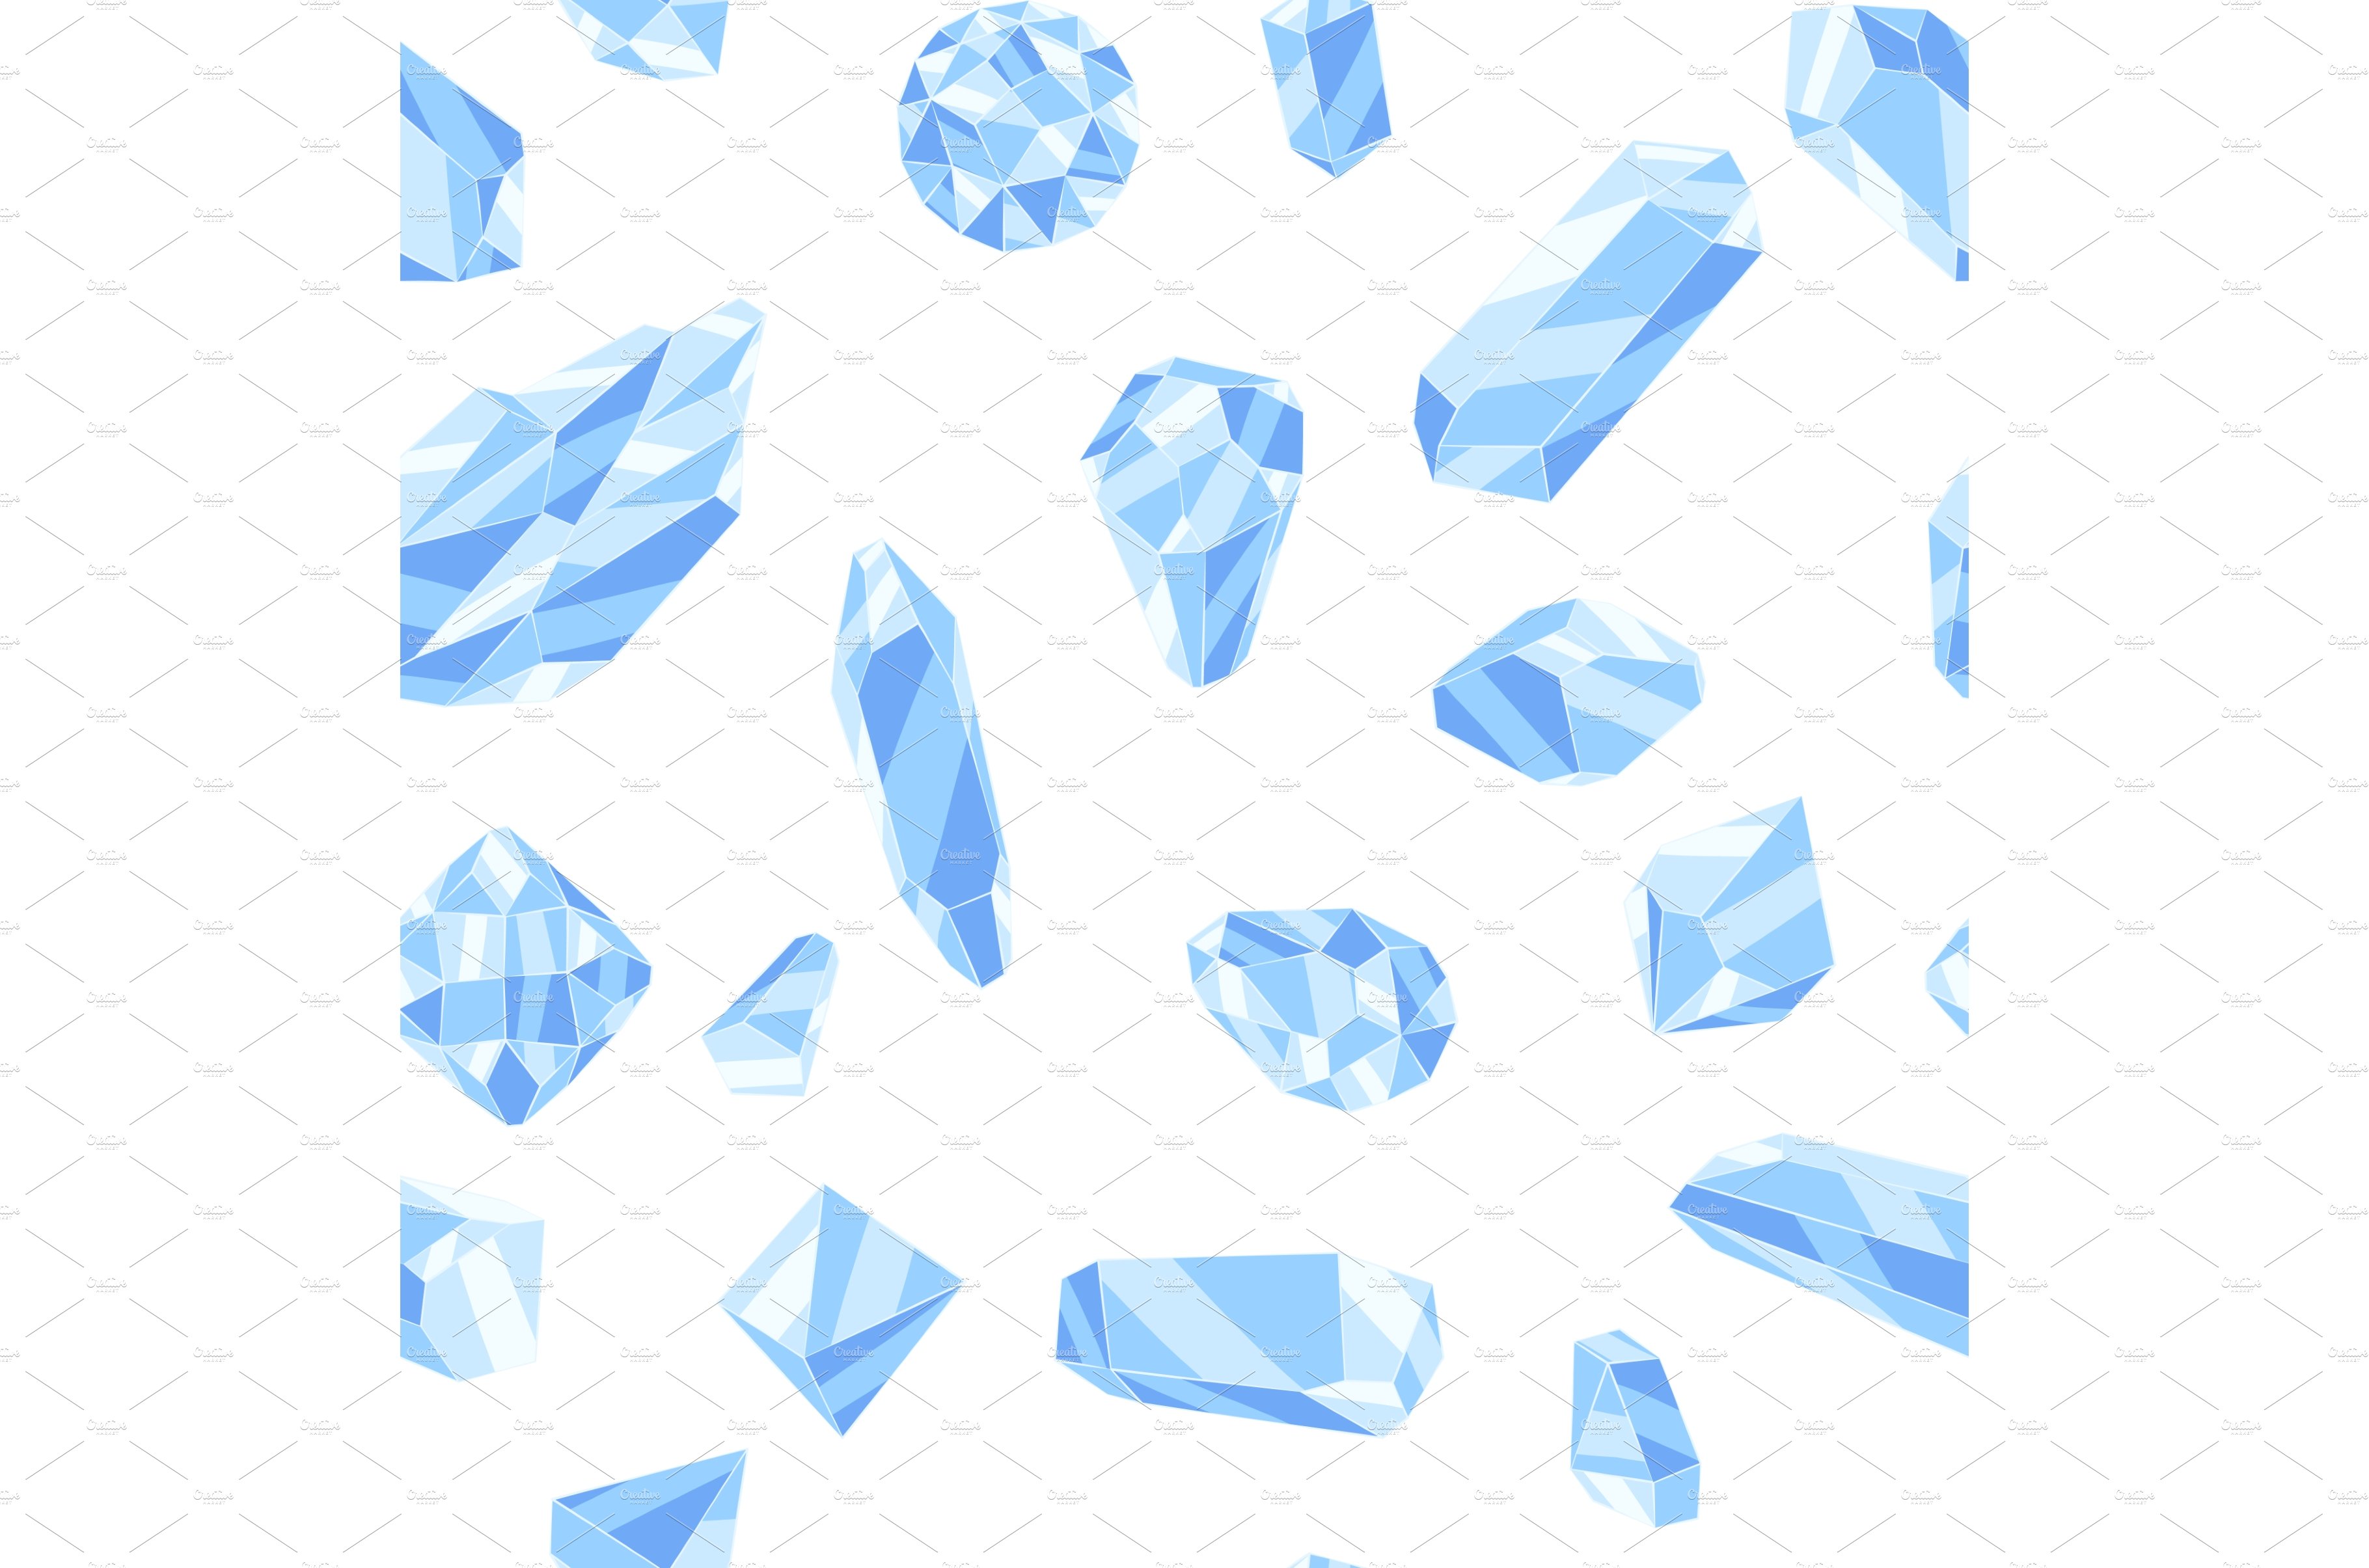 Seamless pattern with crystals or cover image.